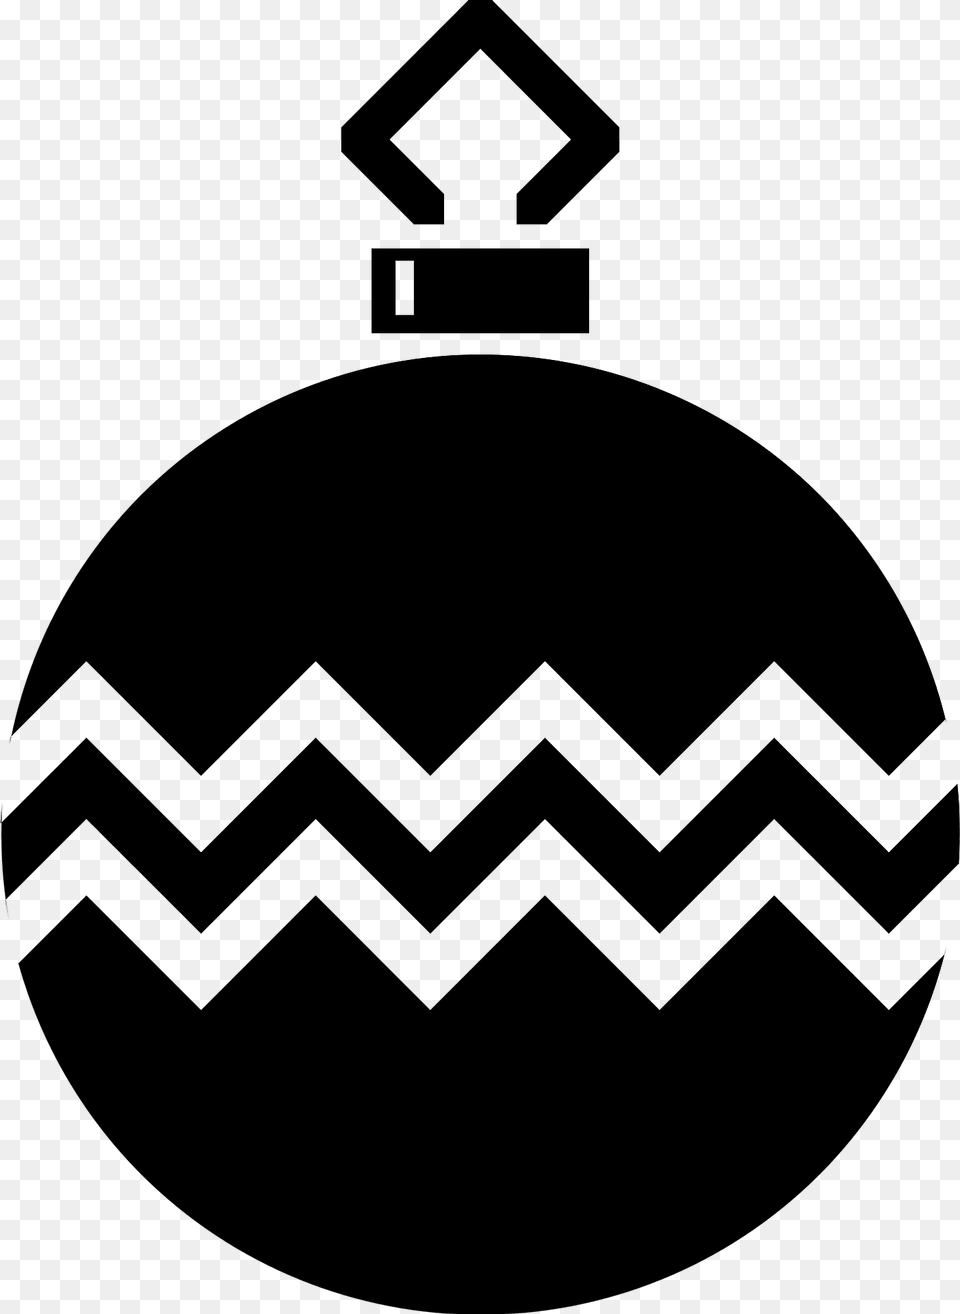 Simple Christmas Ornament Black And White With Zigzag Pattern Clipart, Ammunition, Bomb, Weapon Png